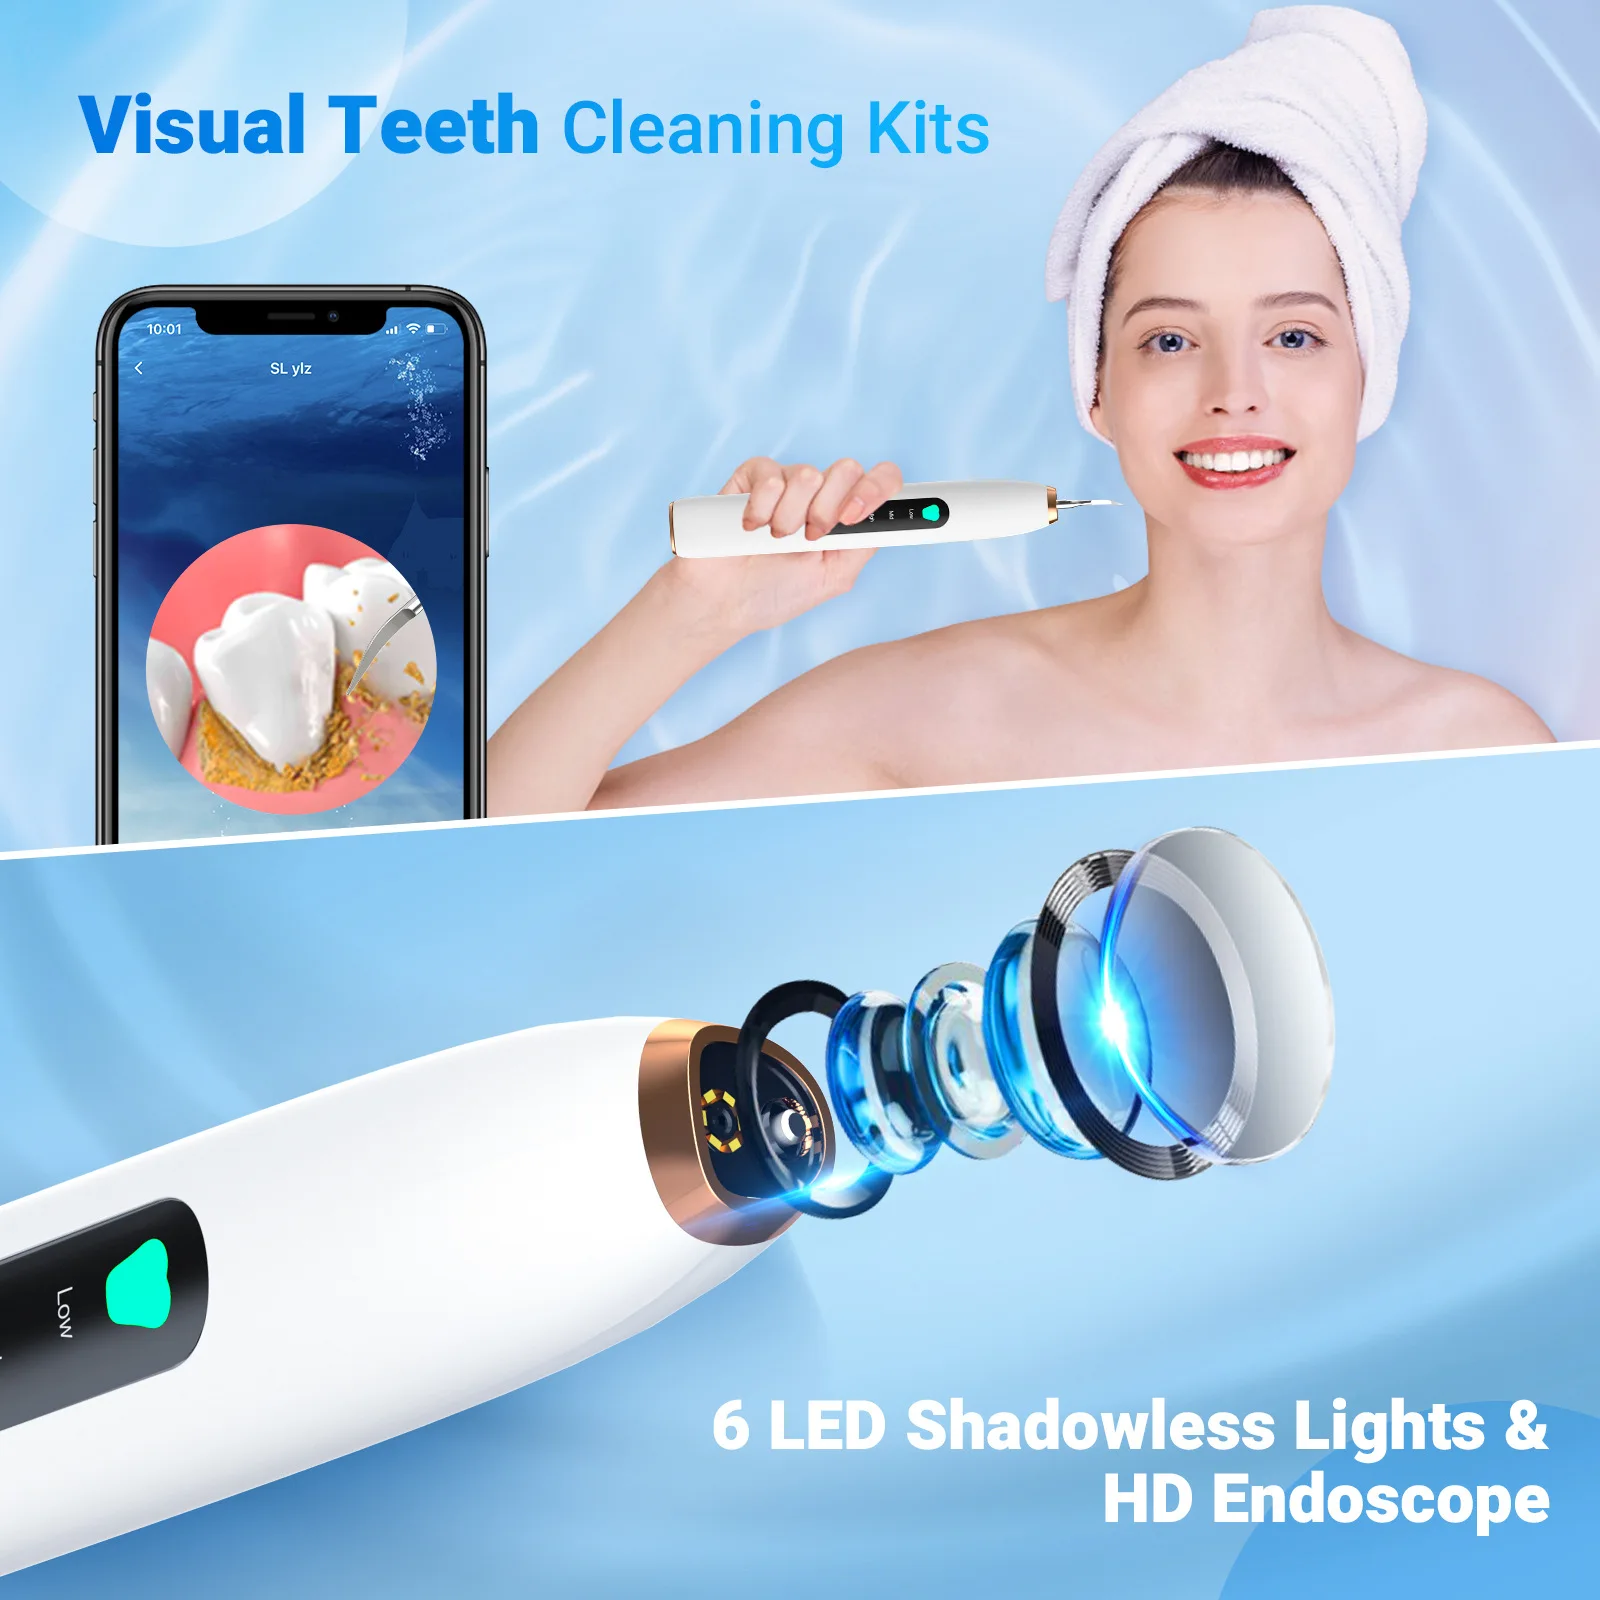 Electric Toothbrush Wireless Charging Dental Cleaning Kit With Endoscope Remove Tartar Teeth Whitening Tool Care Dropshipping enlarge